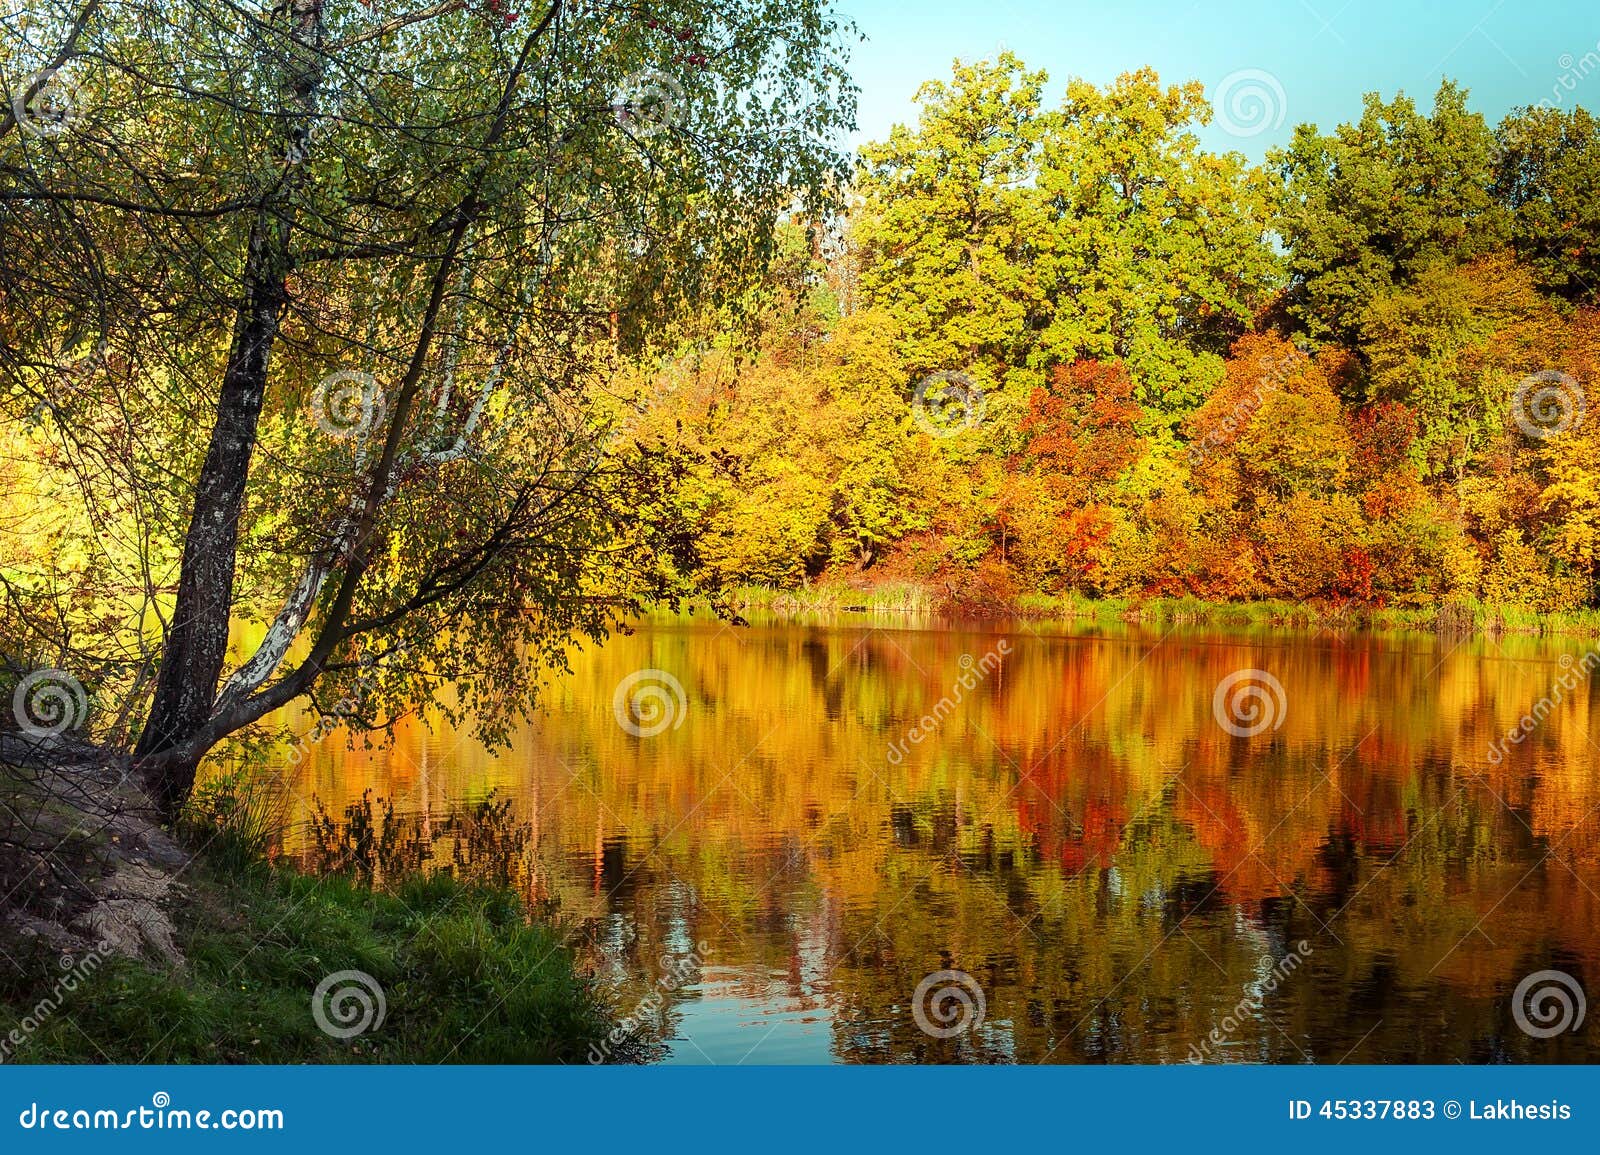 Sunny Day In Outdoor Park With Autumn Trees Reflection Stock Photo ...